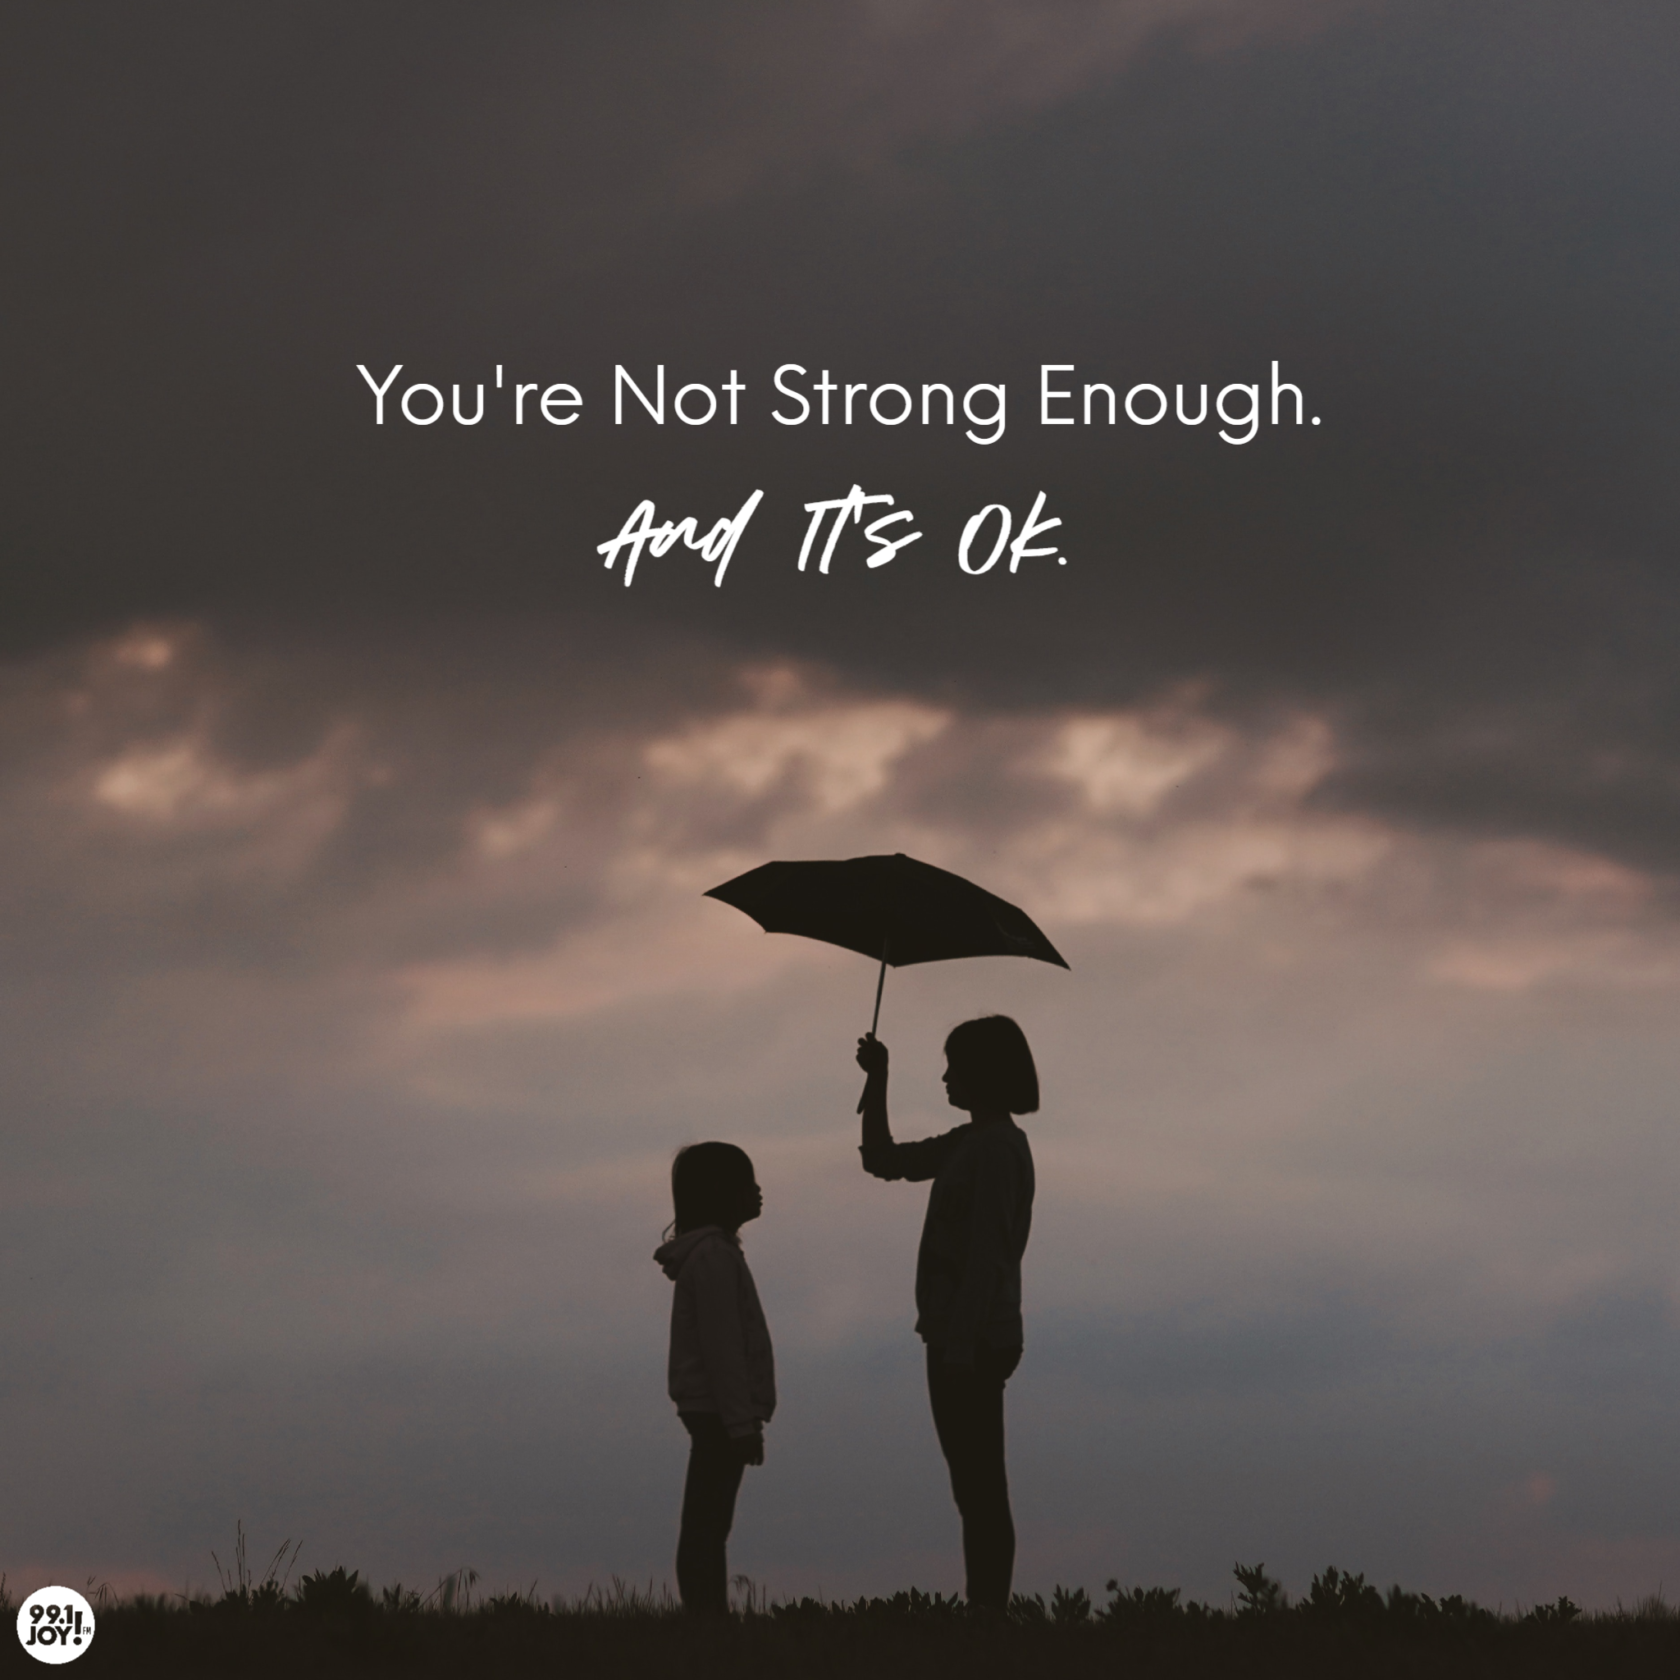 You're Not Strong Enough. And That's Ok.